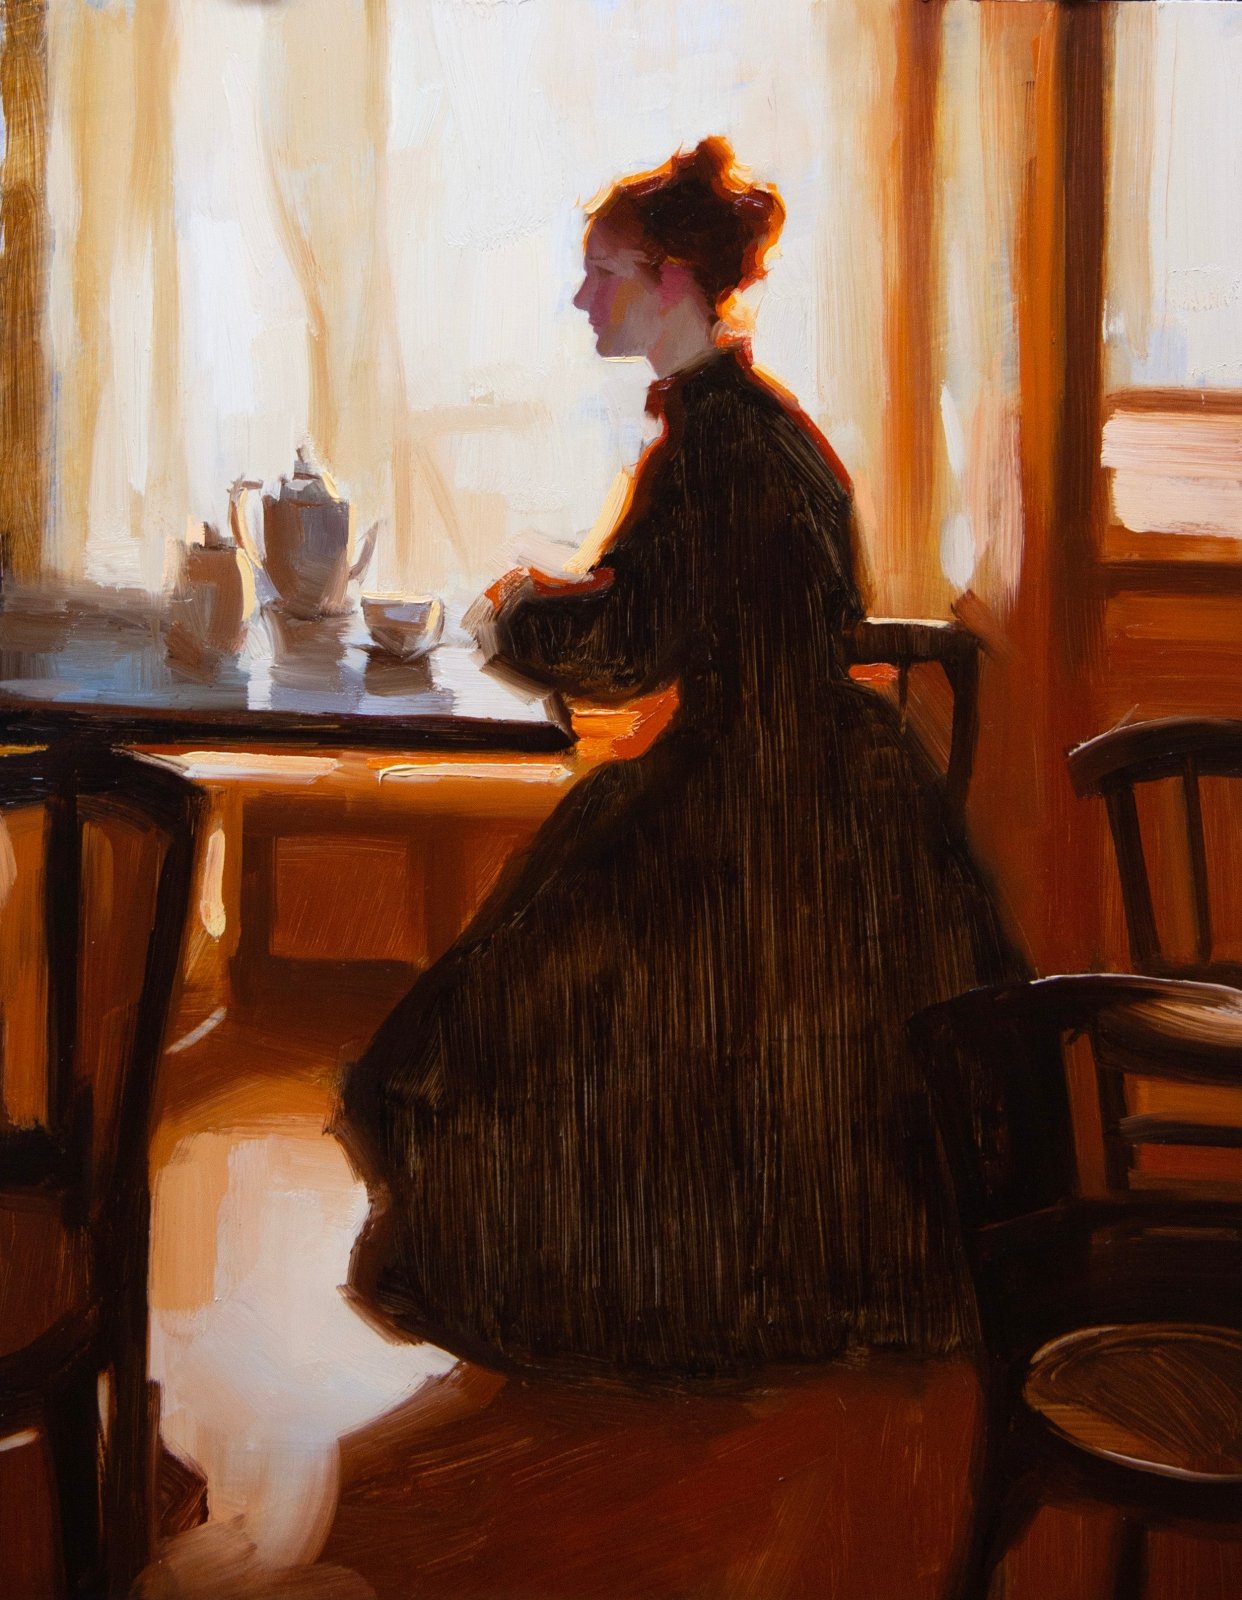 Warm Light by Aaron Westerberg at LePrince Galleries